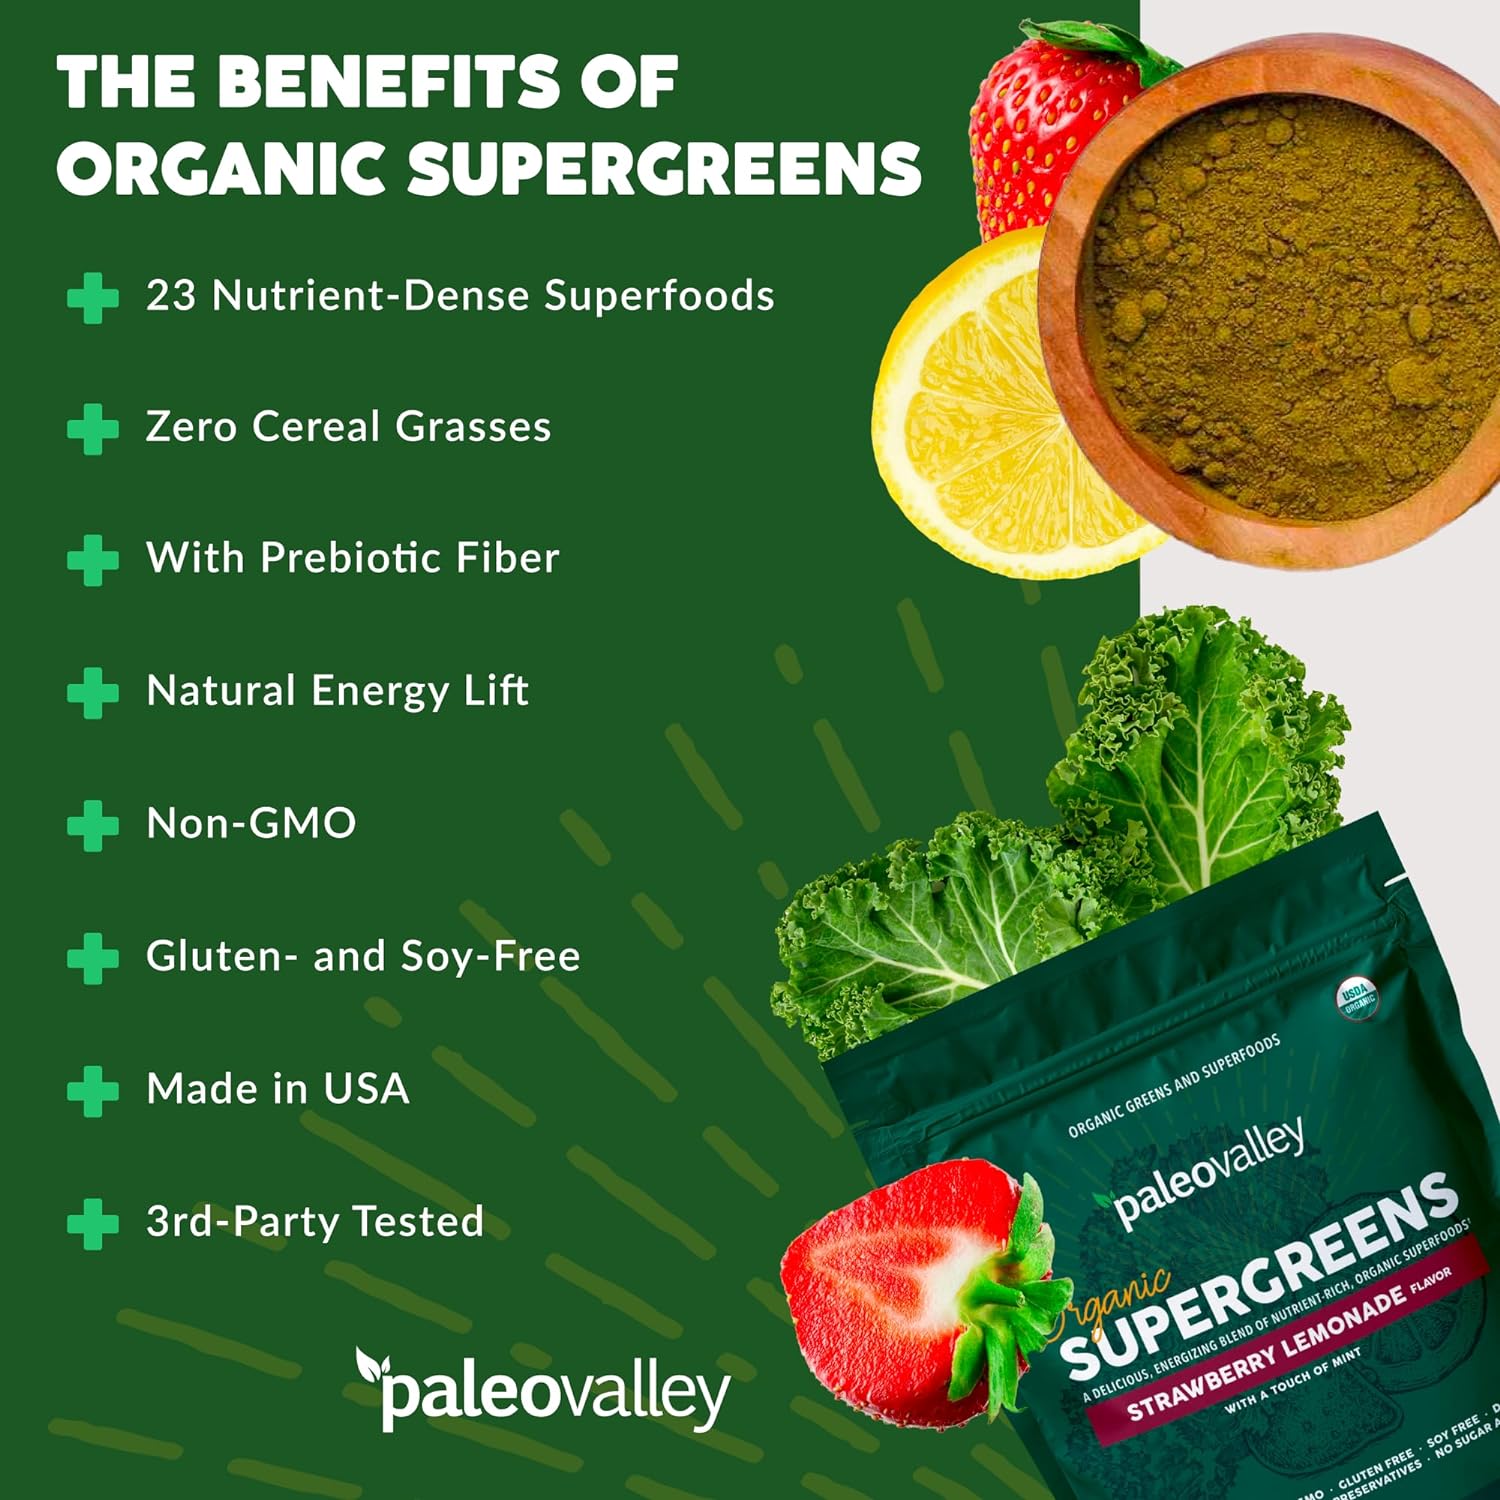 Paleovalley Organic Supergreens - Organic Greens Powder Superfood - Paleo Green Powder Blend - 3 Pack, 28 Servings - 23 Organic Superfoods, Gluten Free, No Cereal Grasses, Soy or Grains : Health & Household